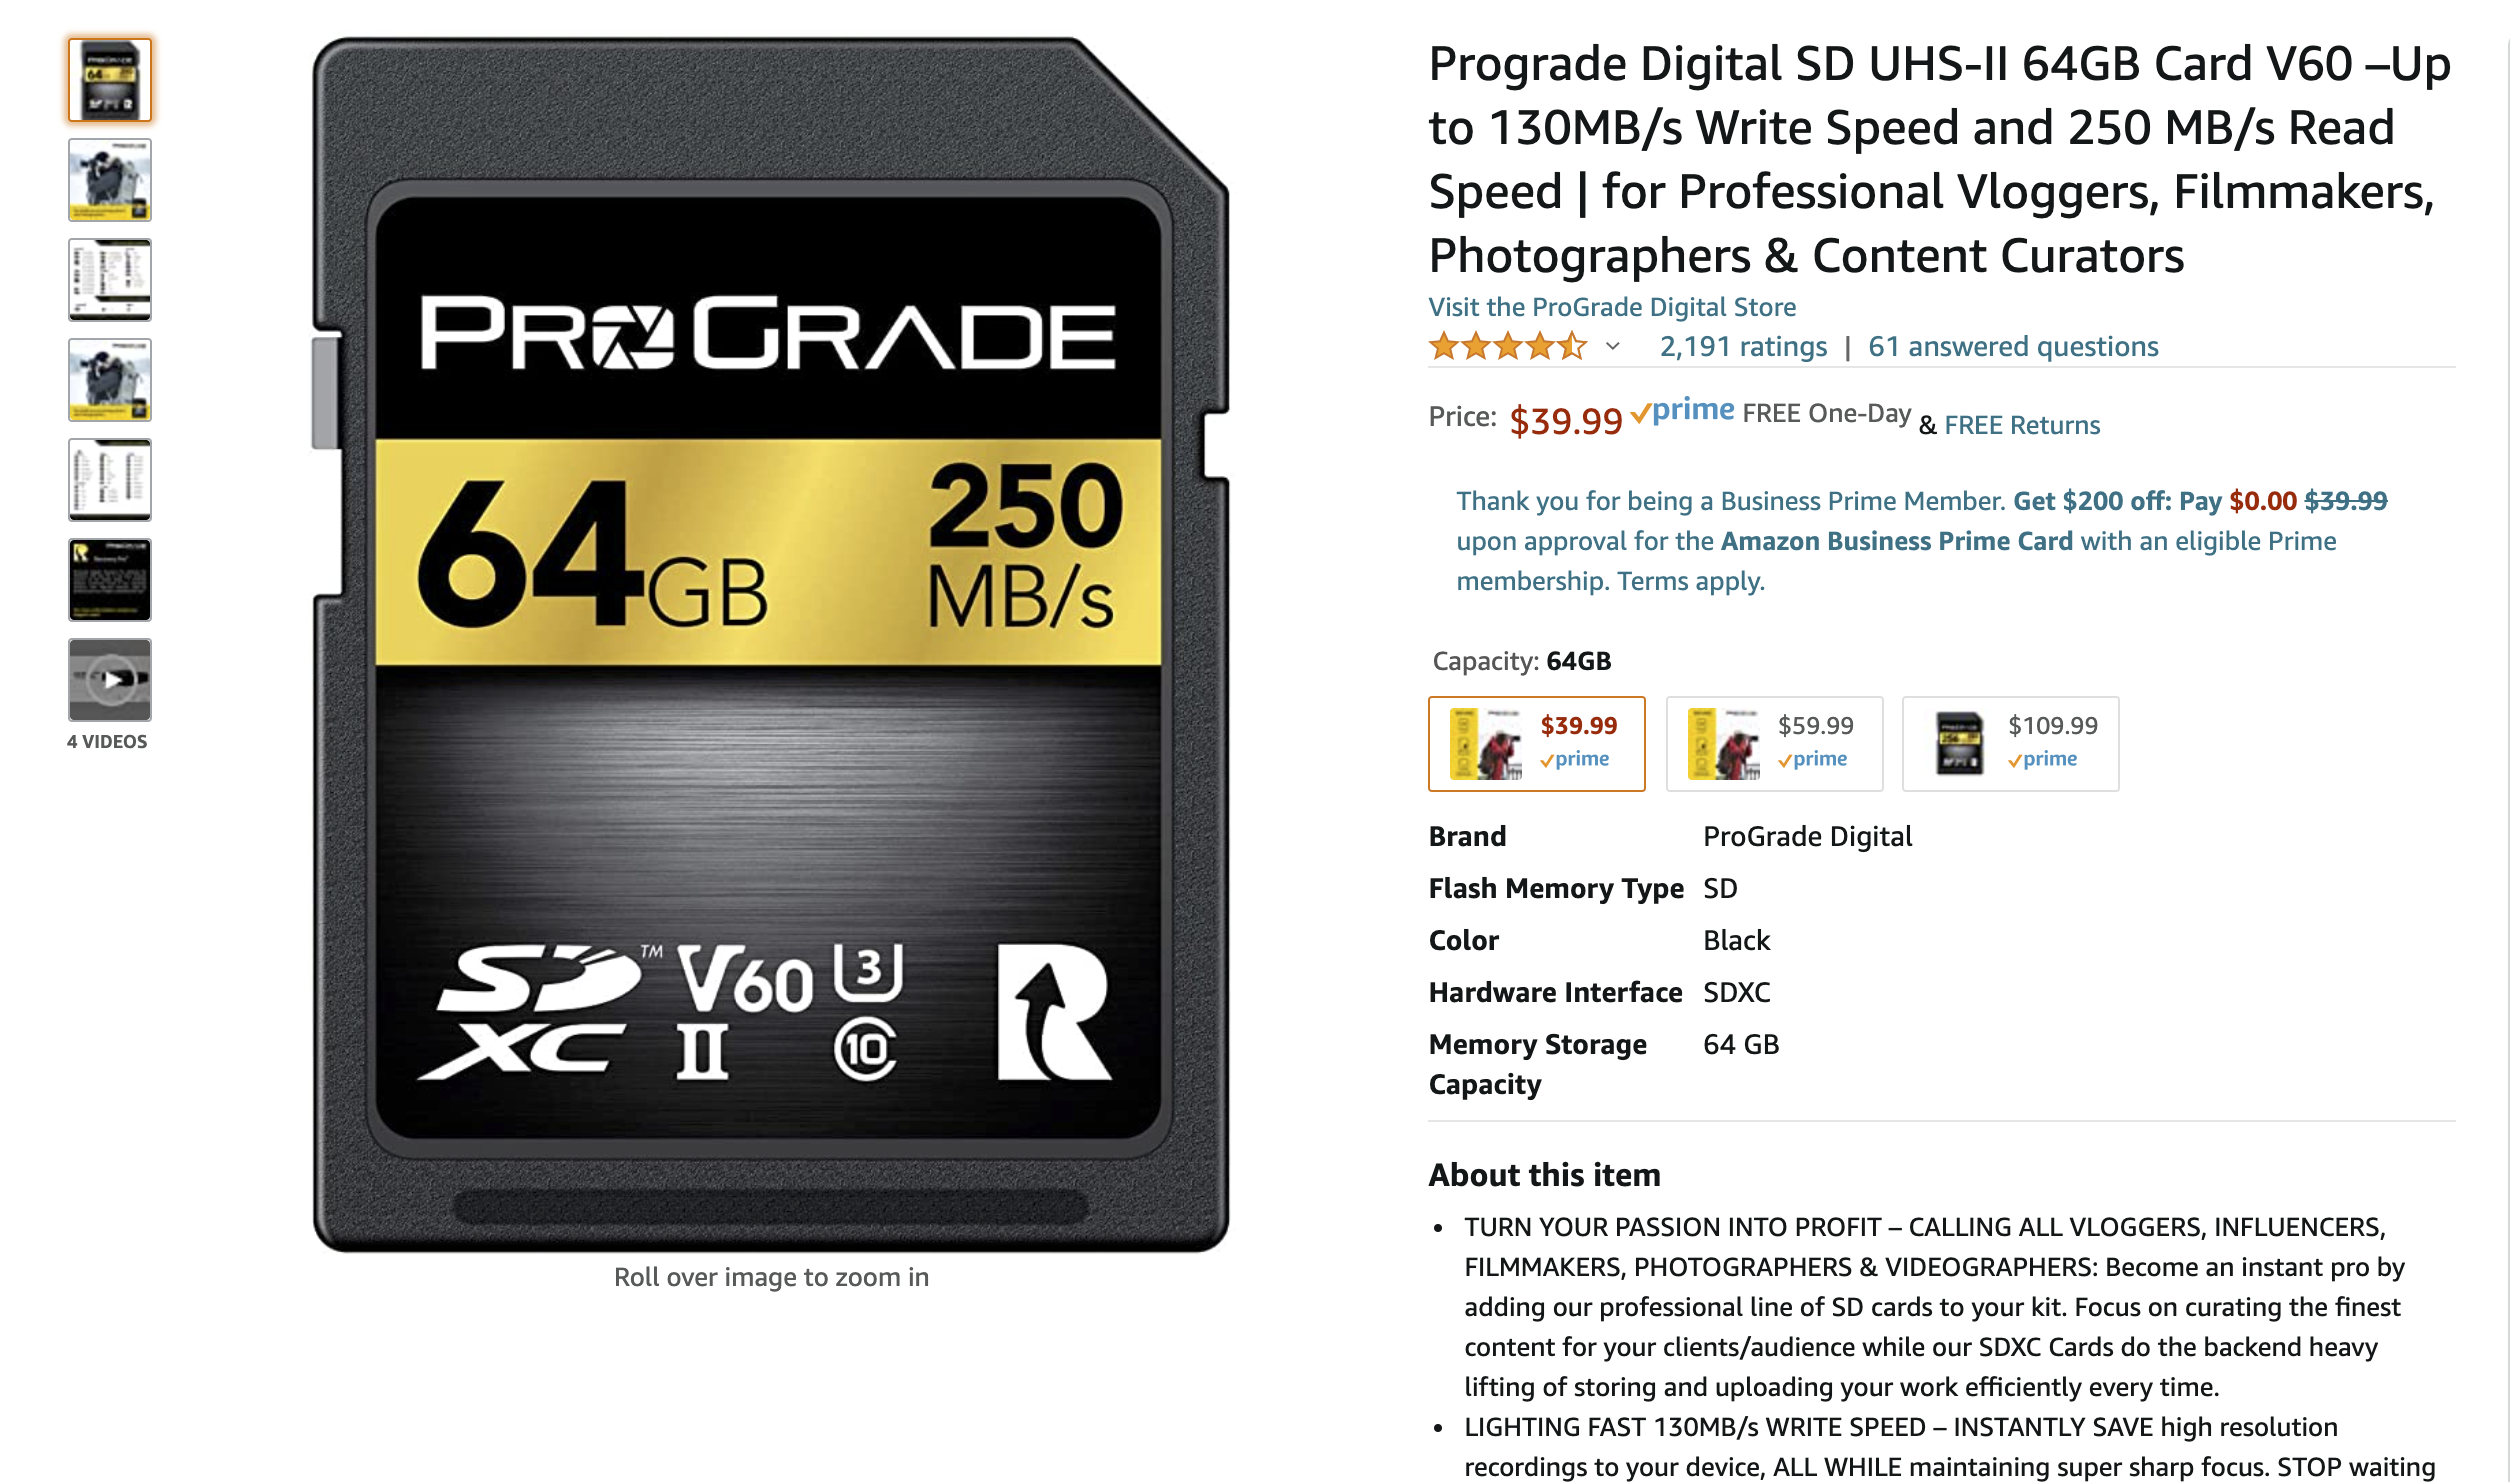 Take 15% off This Pro Grade Digital SD Card (PHOBLOGRAPHER EXCLUSIVE)